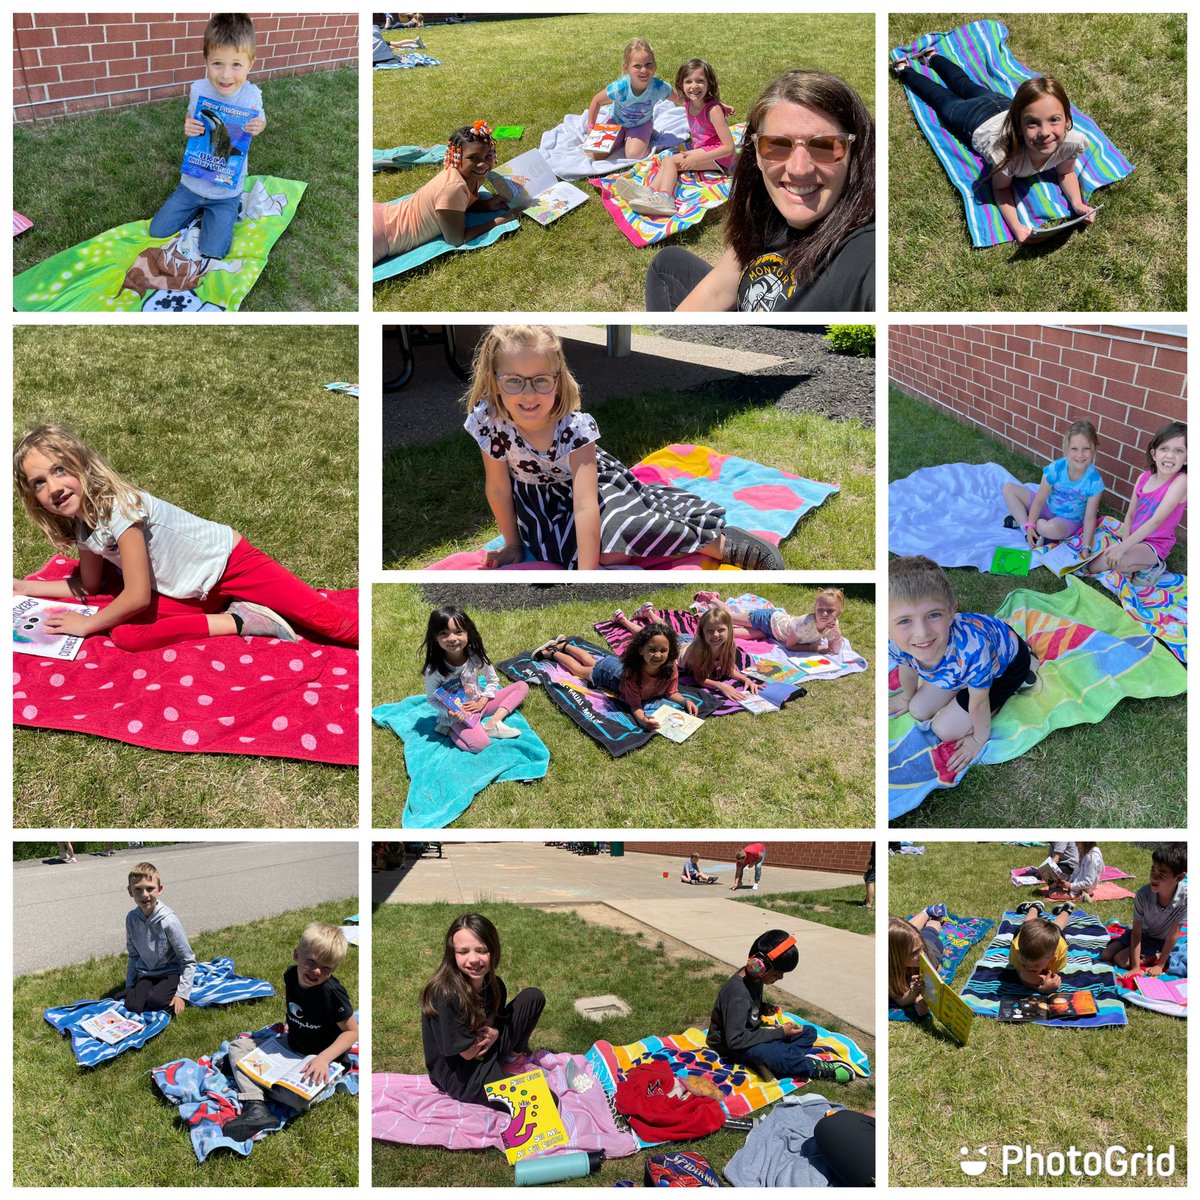 We loved our “reading picnic” today! #montourproud